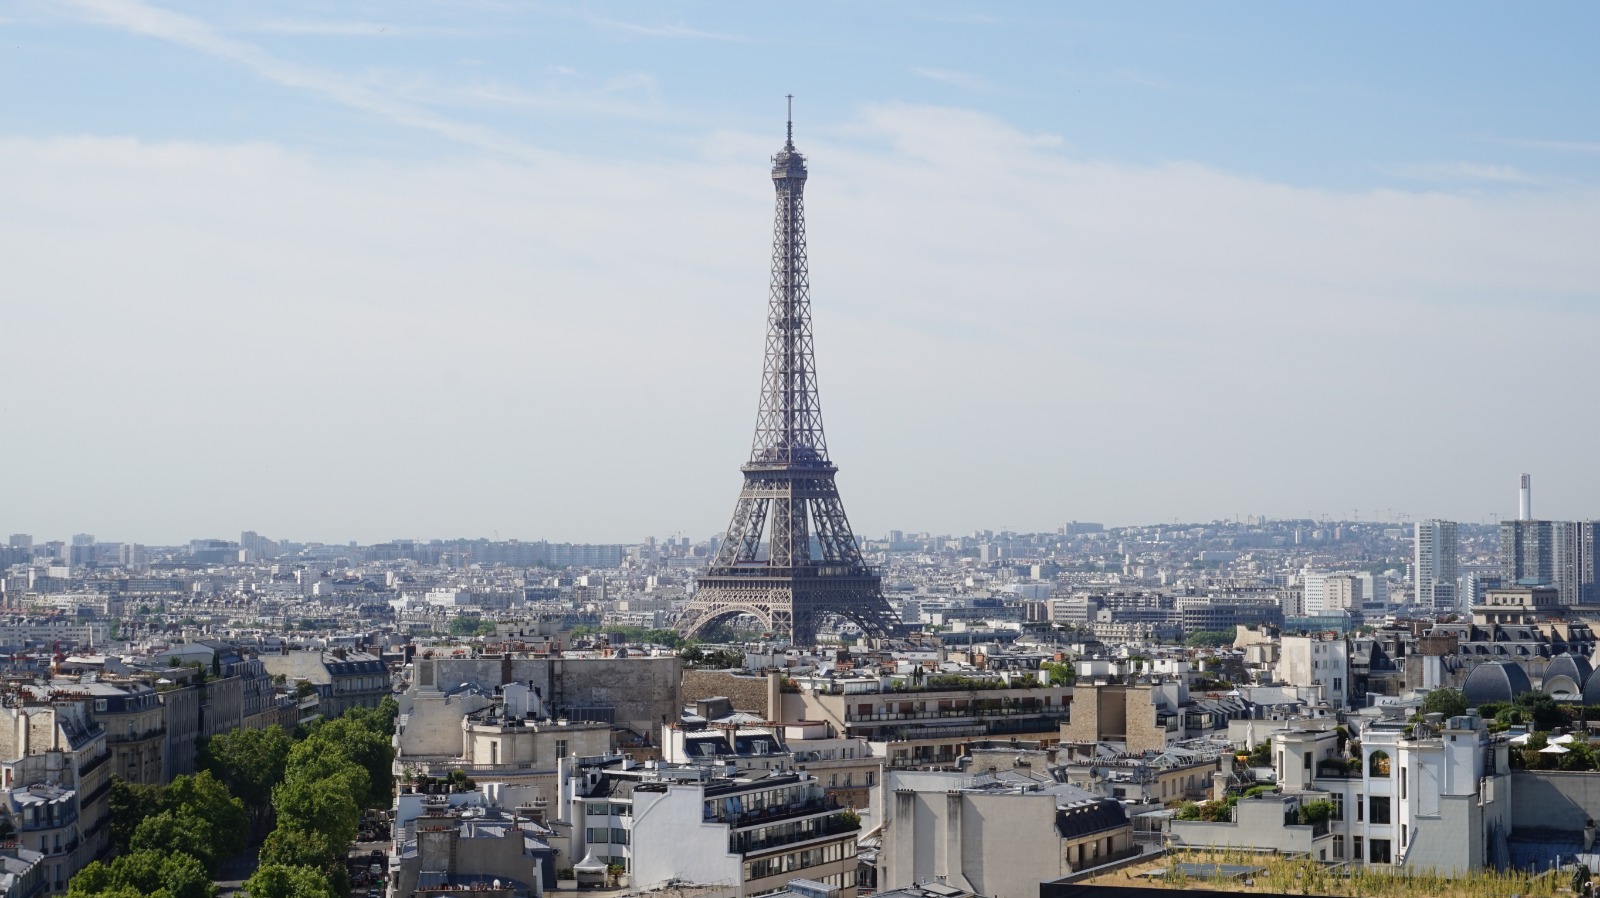 View of the Eiffel Tower from the Arc de Triomphe, Paris